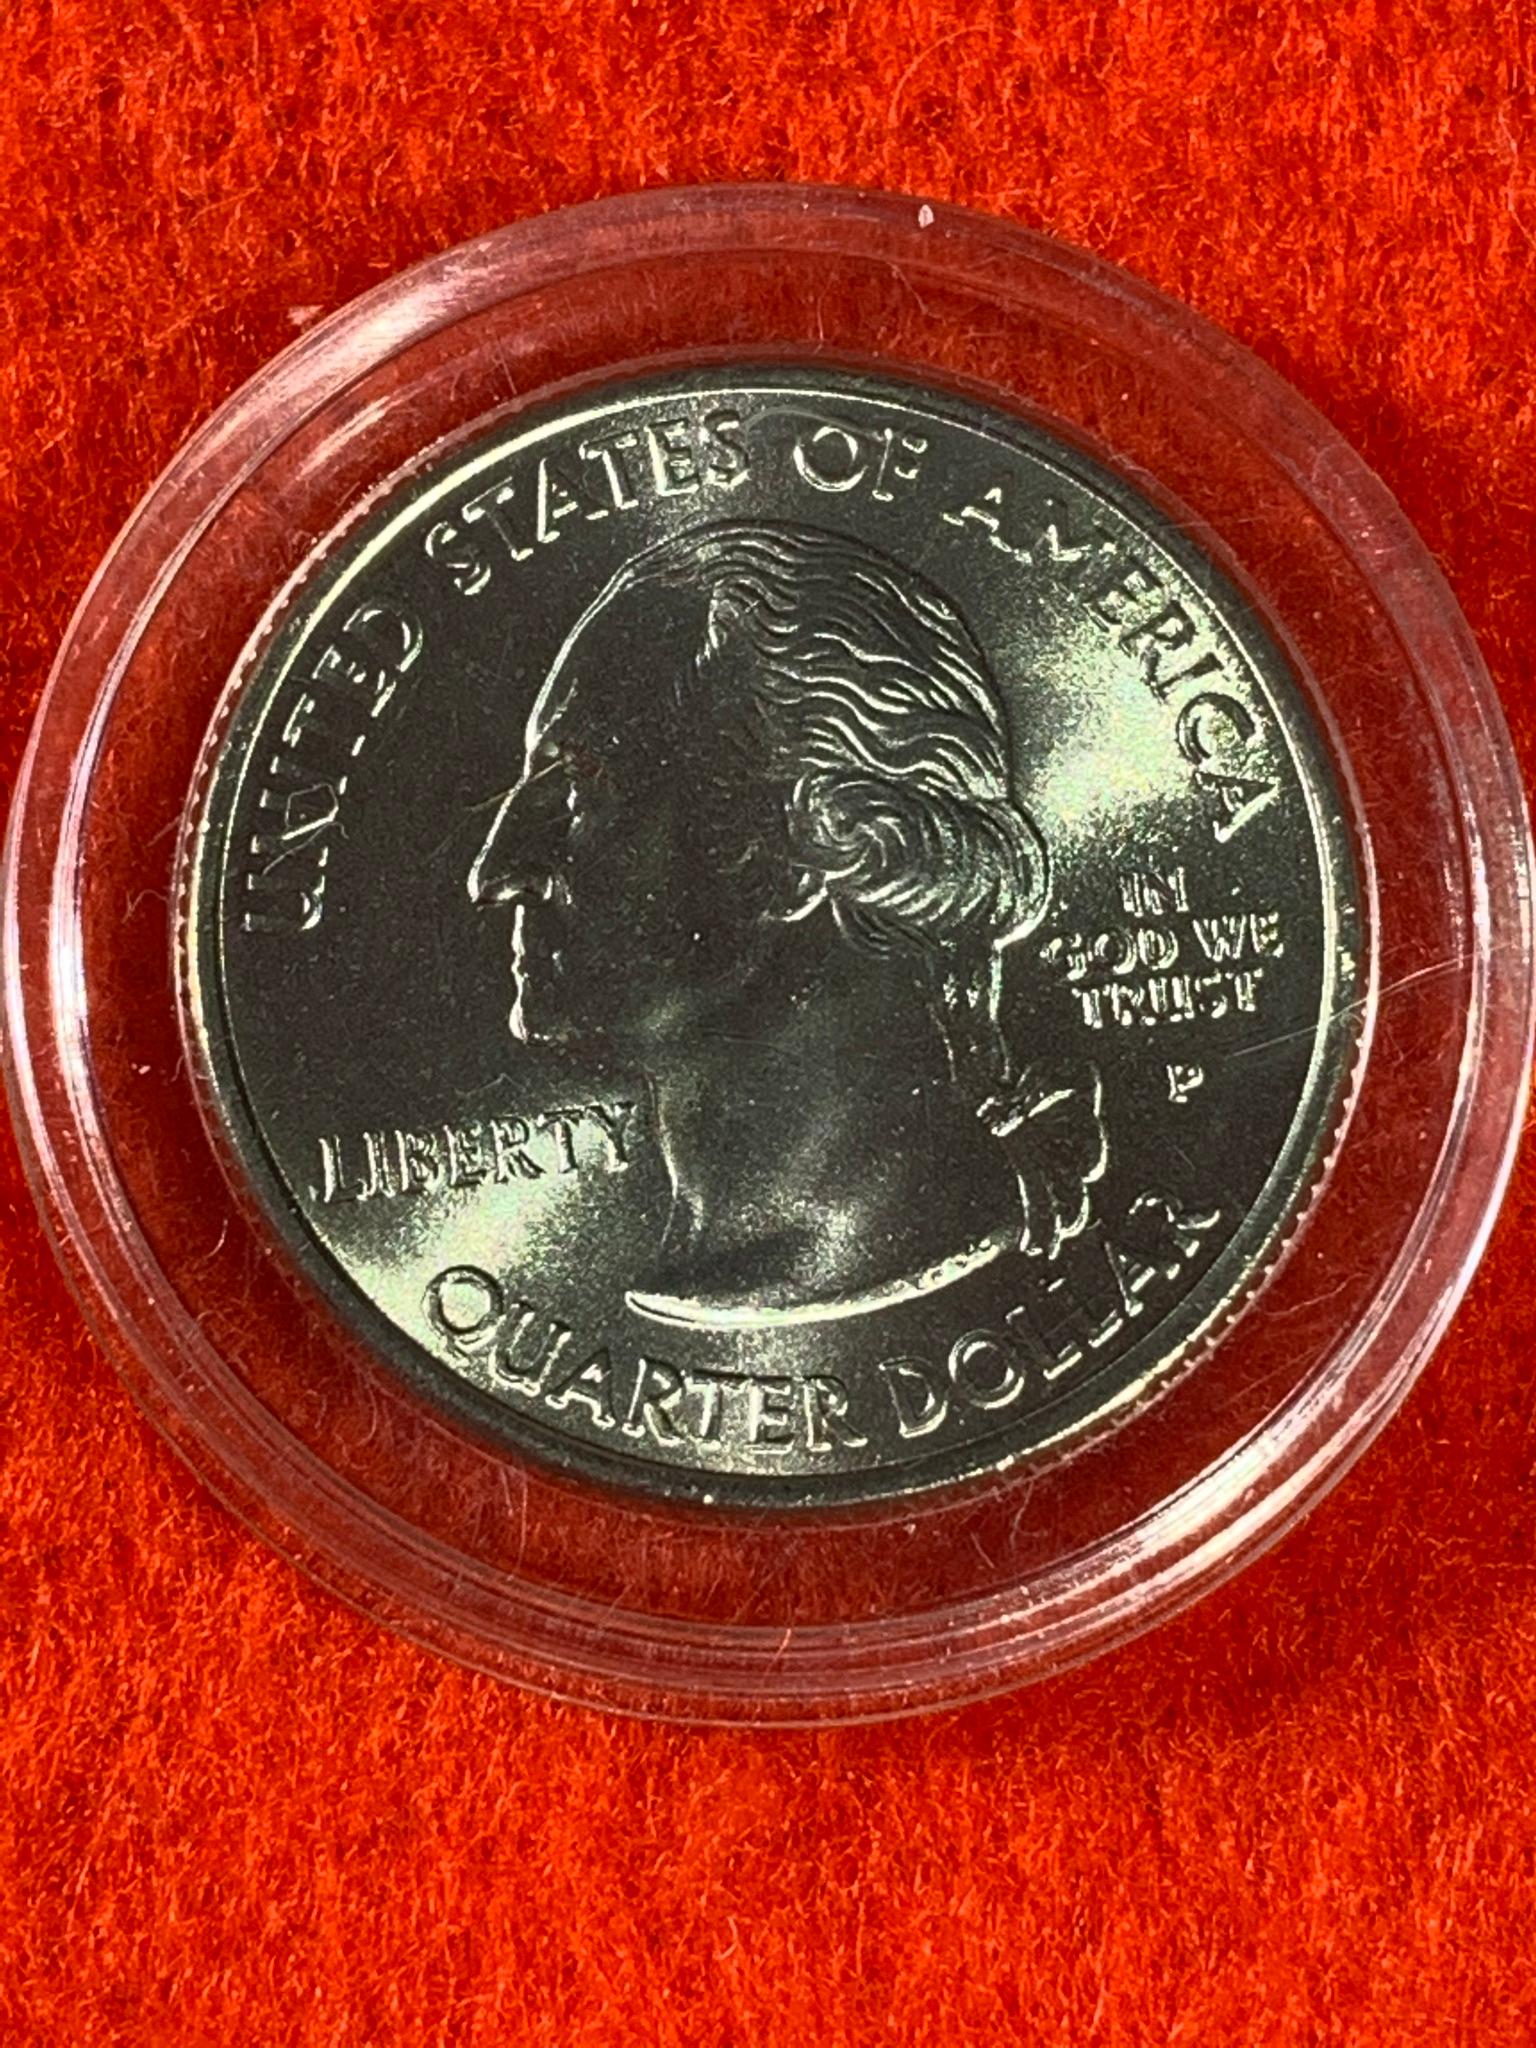 John F. Kennedy Full Color Half Dollar, Commemorative Coins & Uncirculated Coins